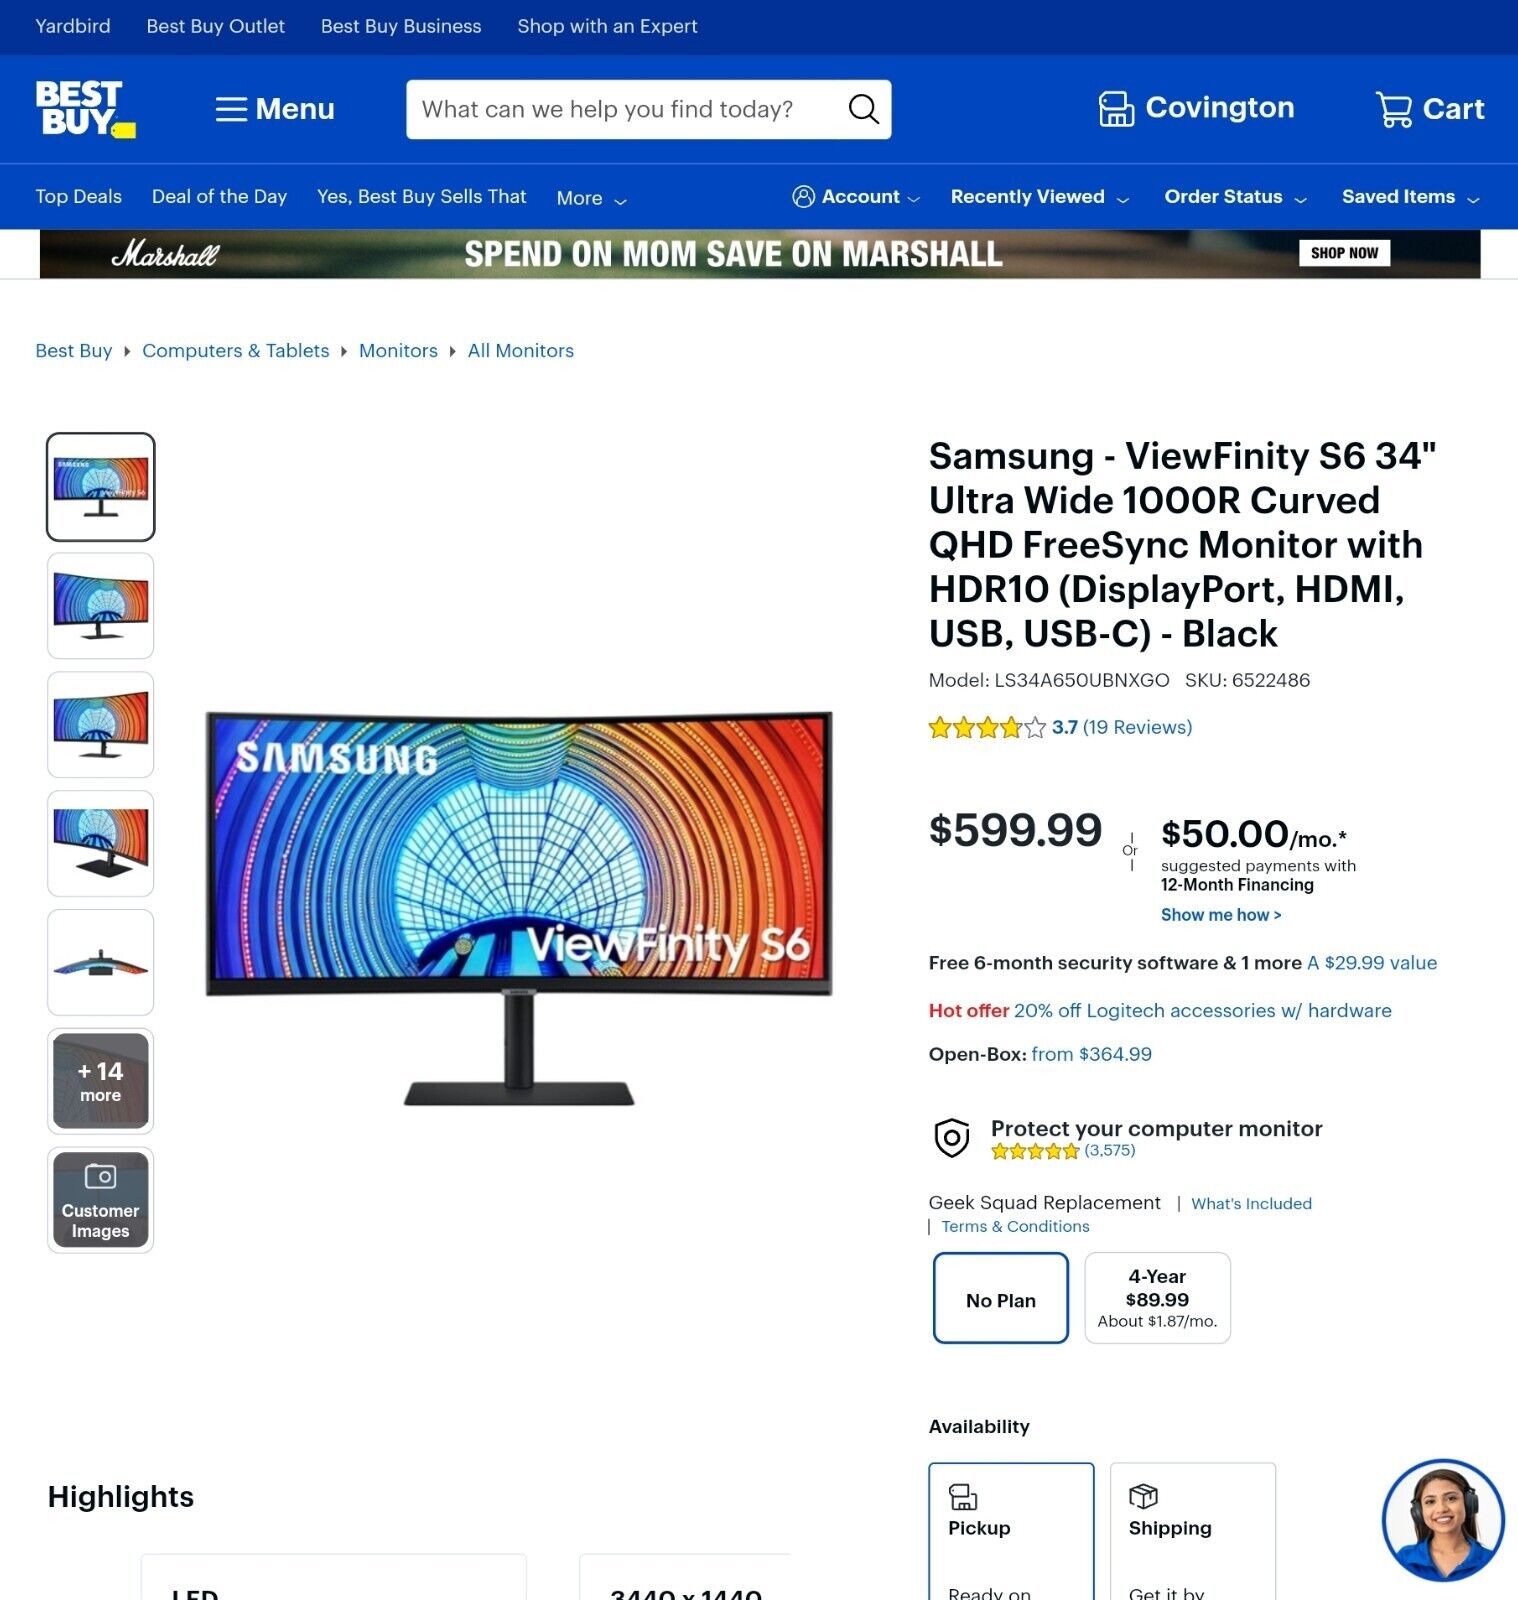 Samsung ViewFinity S6 34 in Ultra Wide Curved Monitor - Black gaming monitor